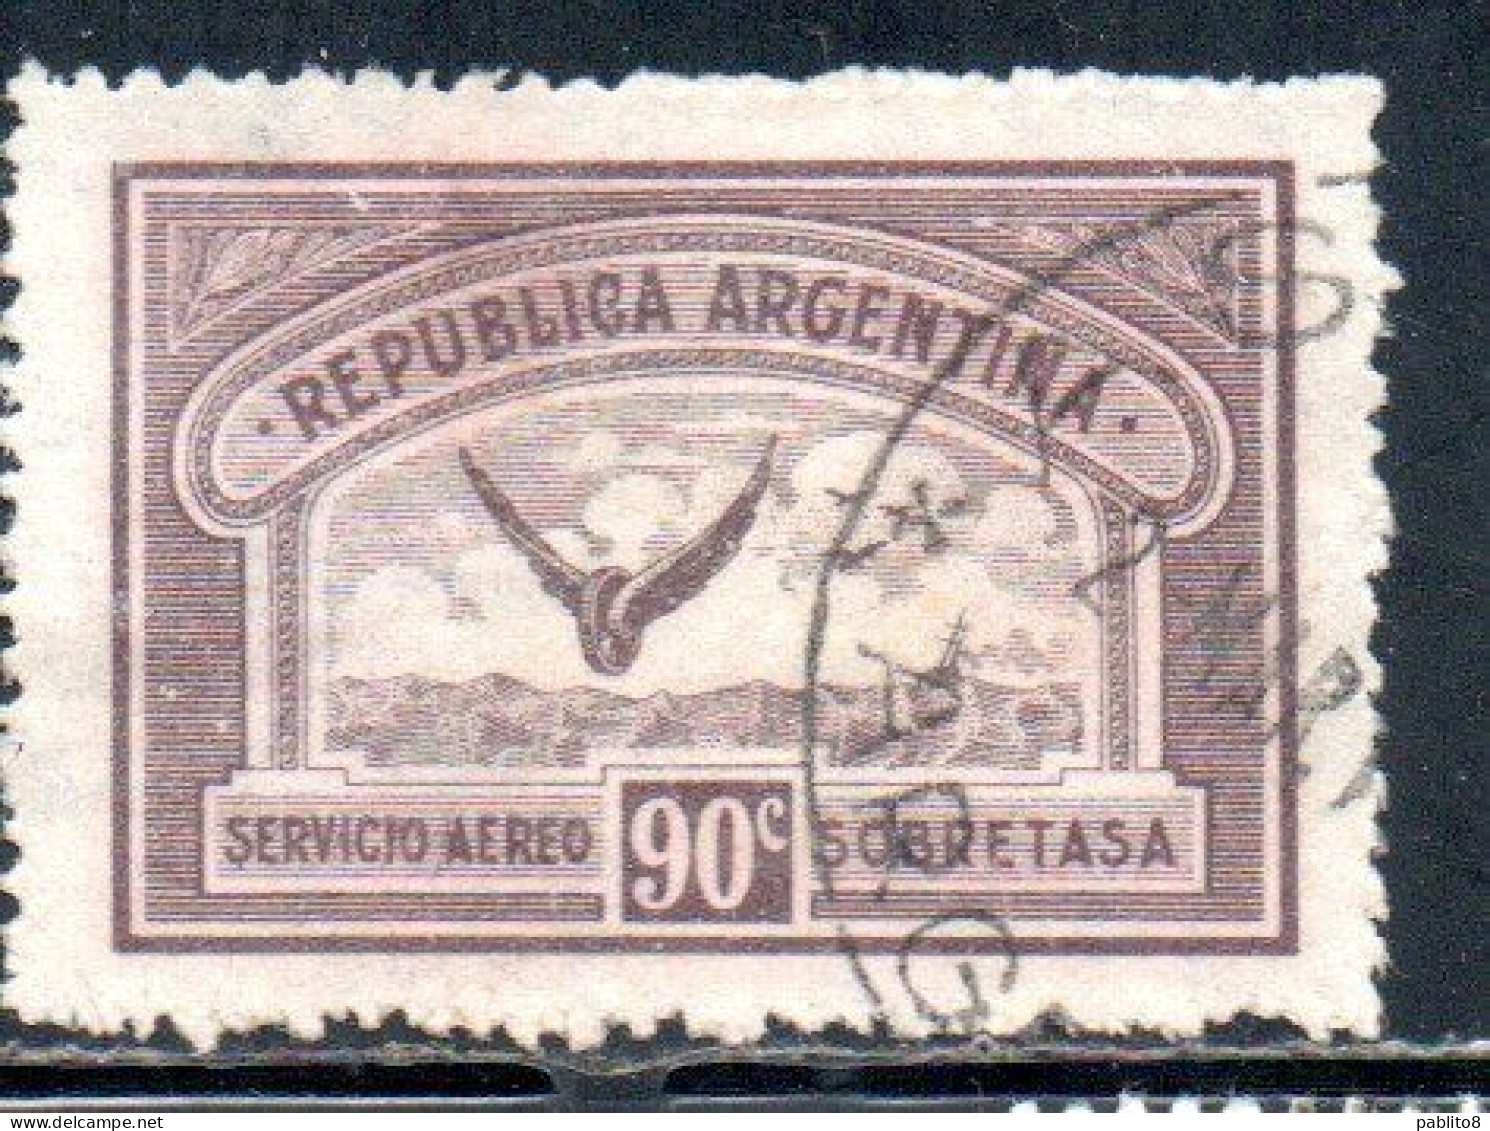 ARGENTINA 1928 AIR POST MAIL CORREO AEREO AIRMAIL WINGS CROSS THE SEA 90c USED USADO OBLITERE' - Poste Aérienne